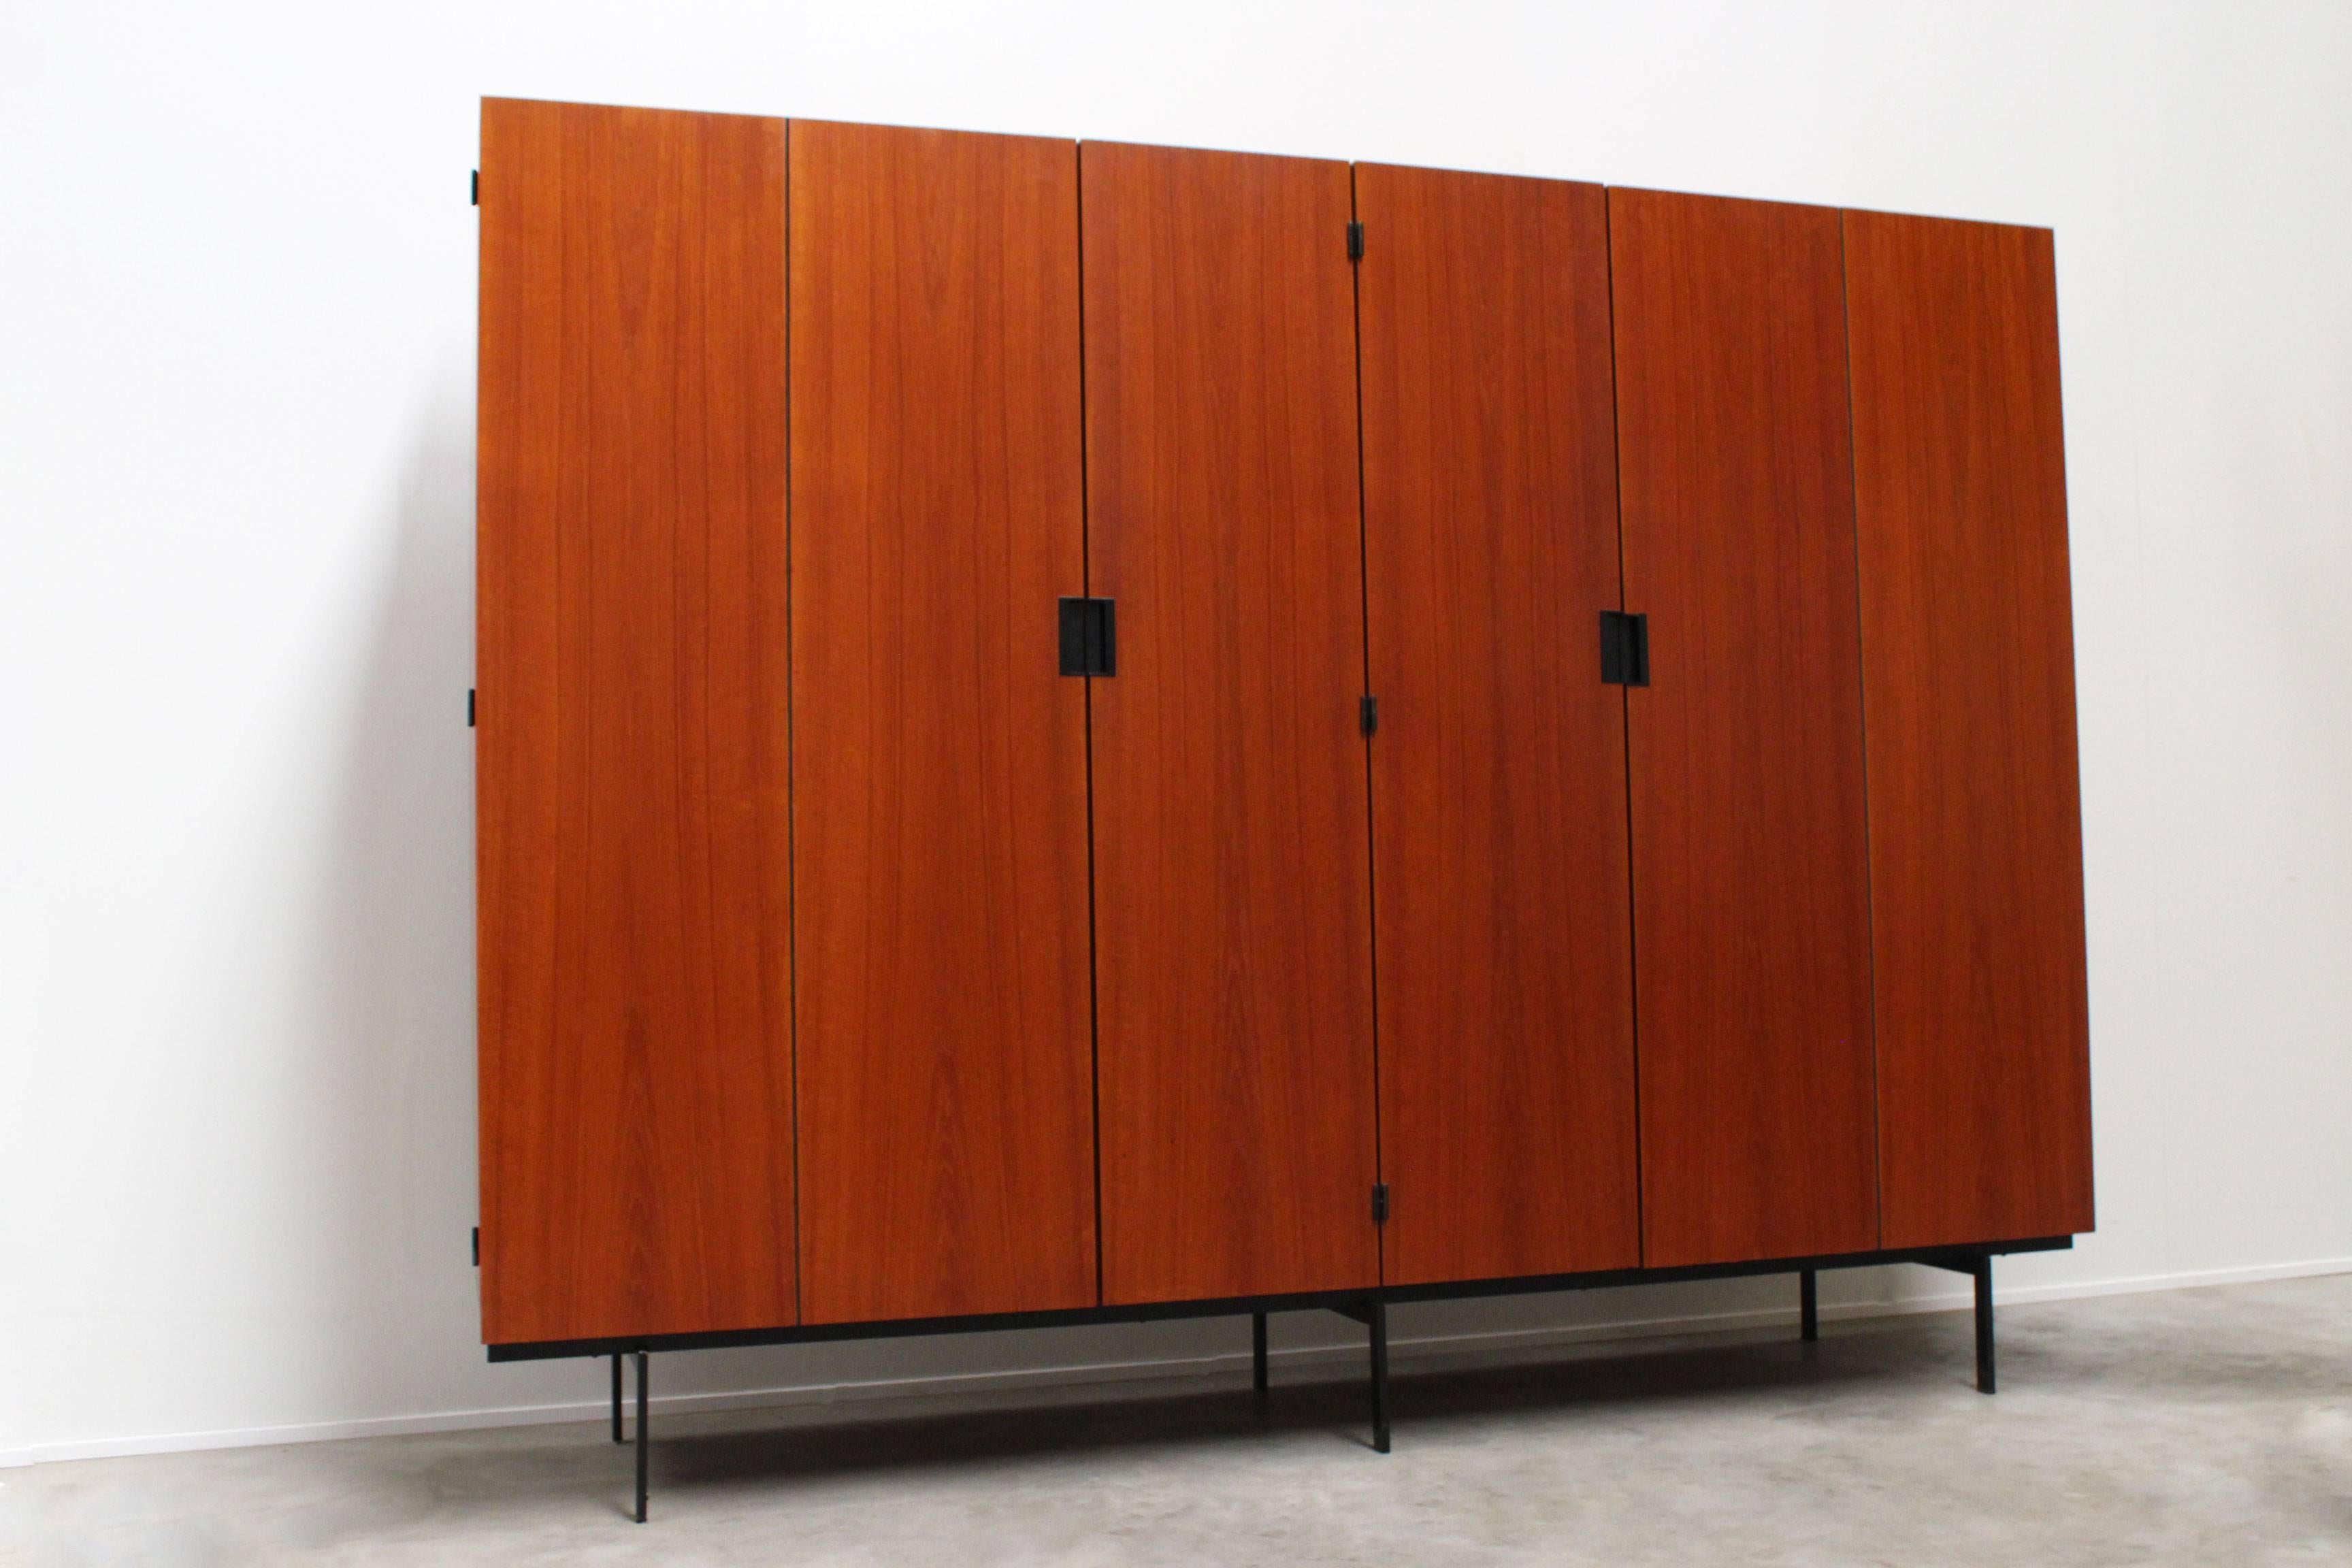 Large KU-16 Japanese series cabinet designed by Cees Braakman for Pastoe, 1958. Cees Braakman's Japanese series is known for its Minimalist look and warm teak colors. Cabinet interior with multiple shelves, mirror, sock storage, tie storage and